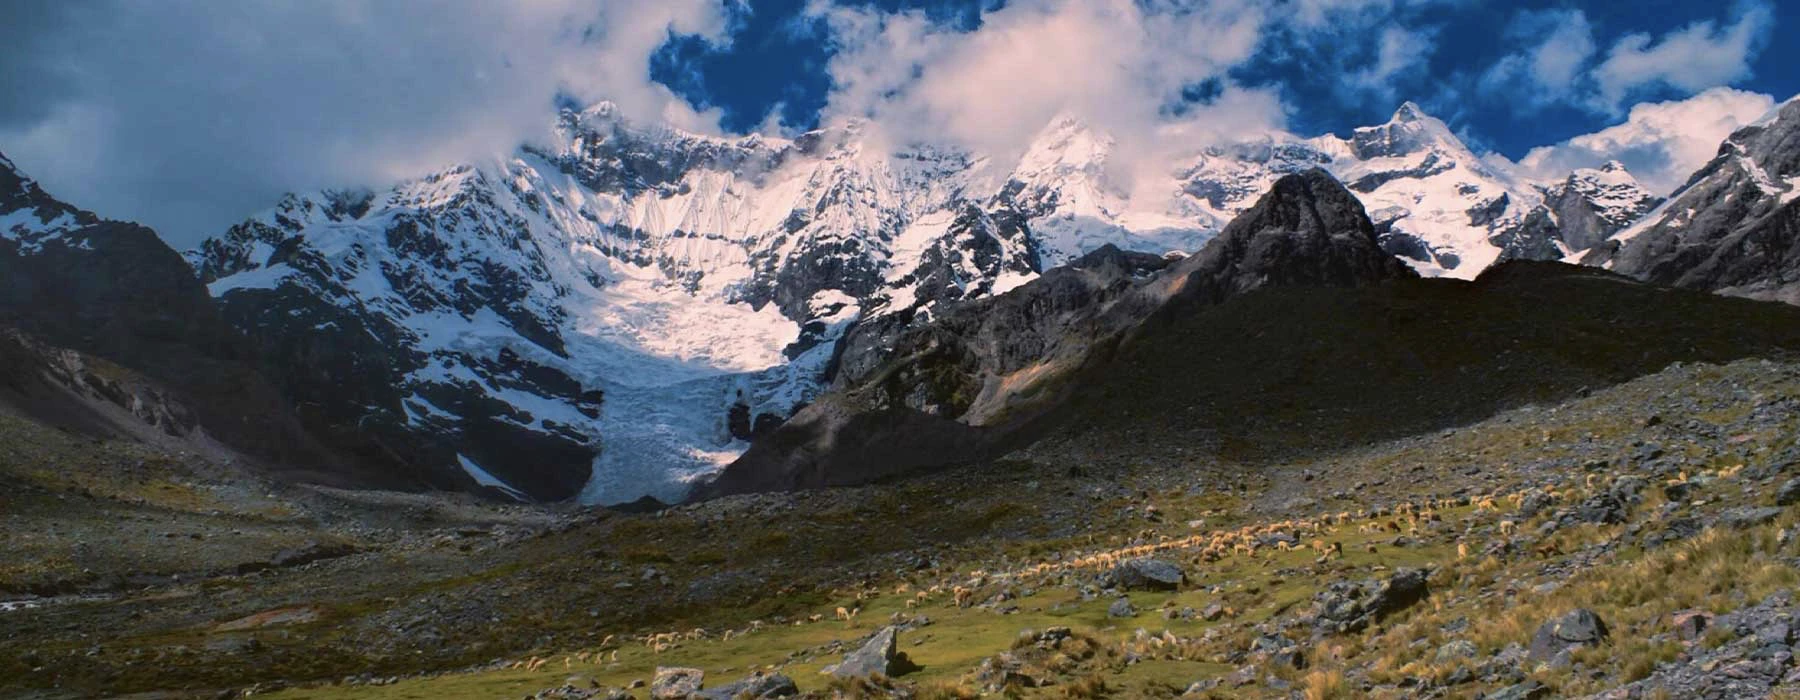 Ausangate Mountain a missed destination in Peru, only for adventure travelers